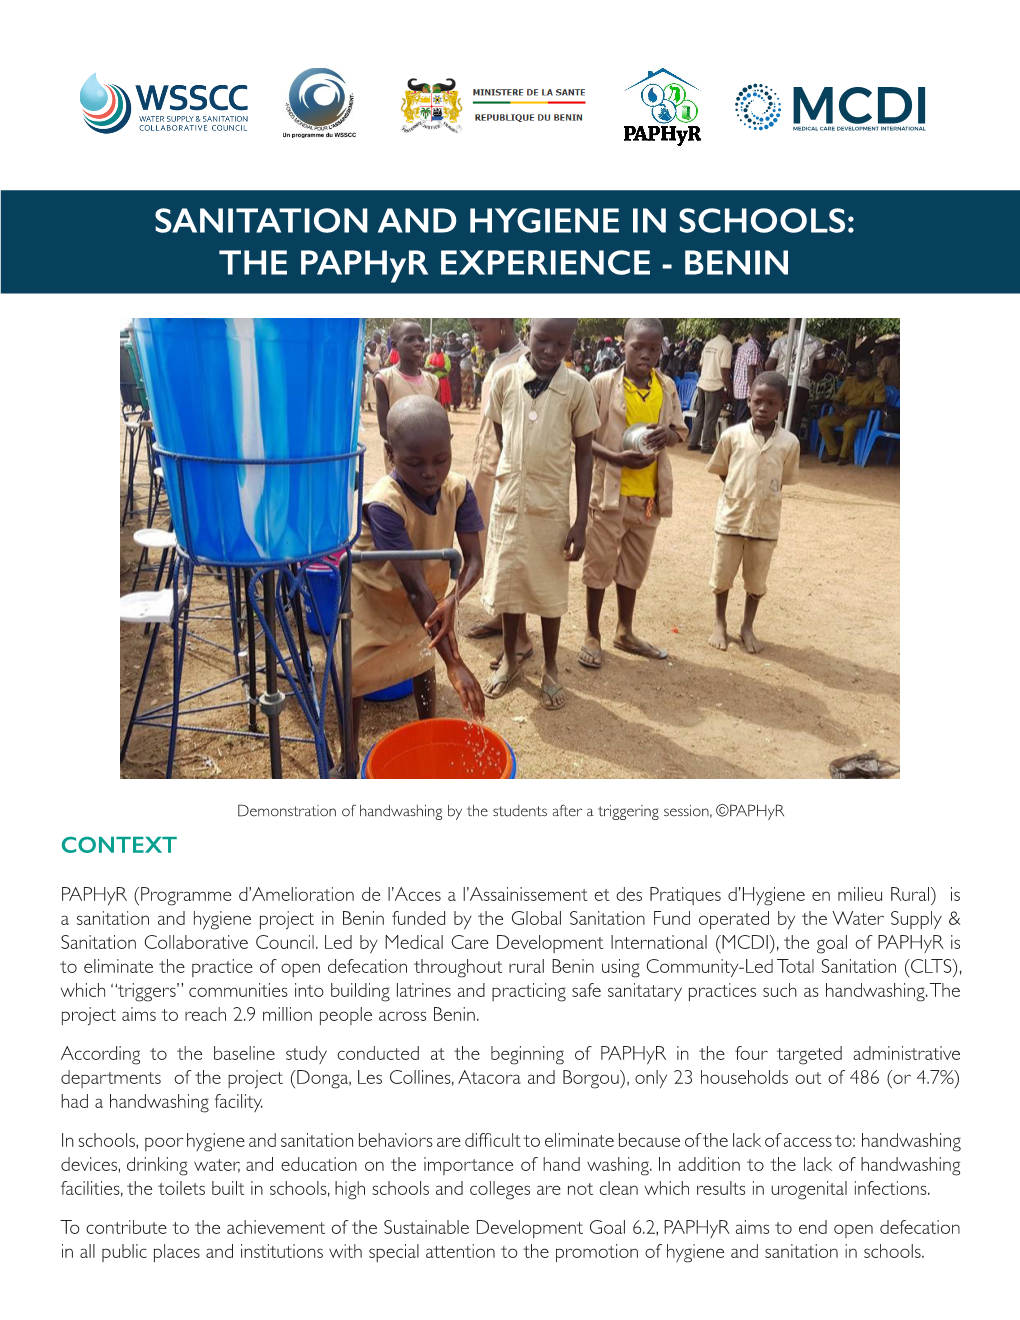 SANITATION and HYGIENE in SCHOOLS: the Paphyr EXPERIENCE - BENIN